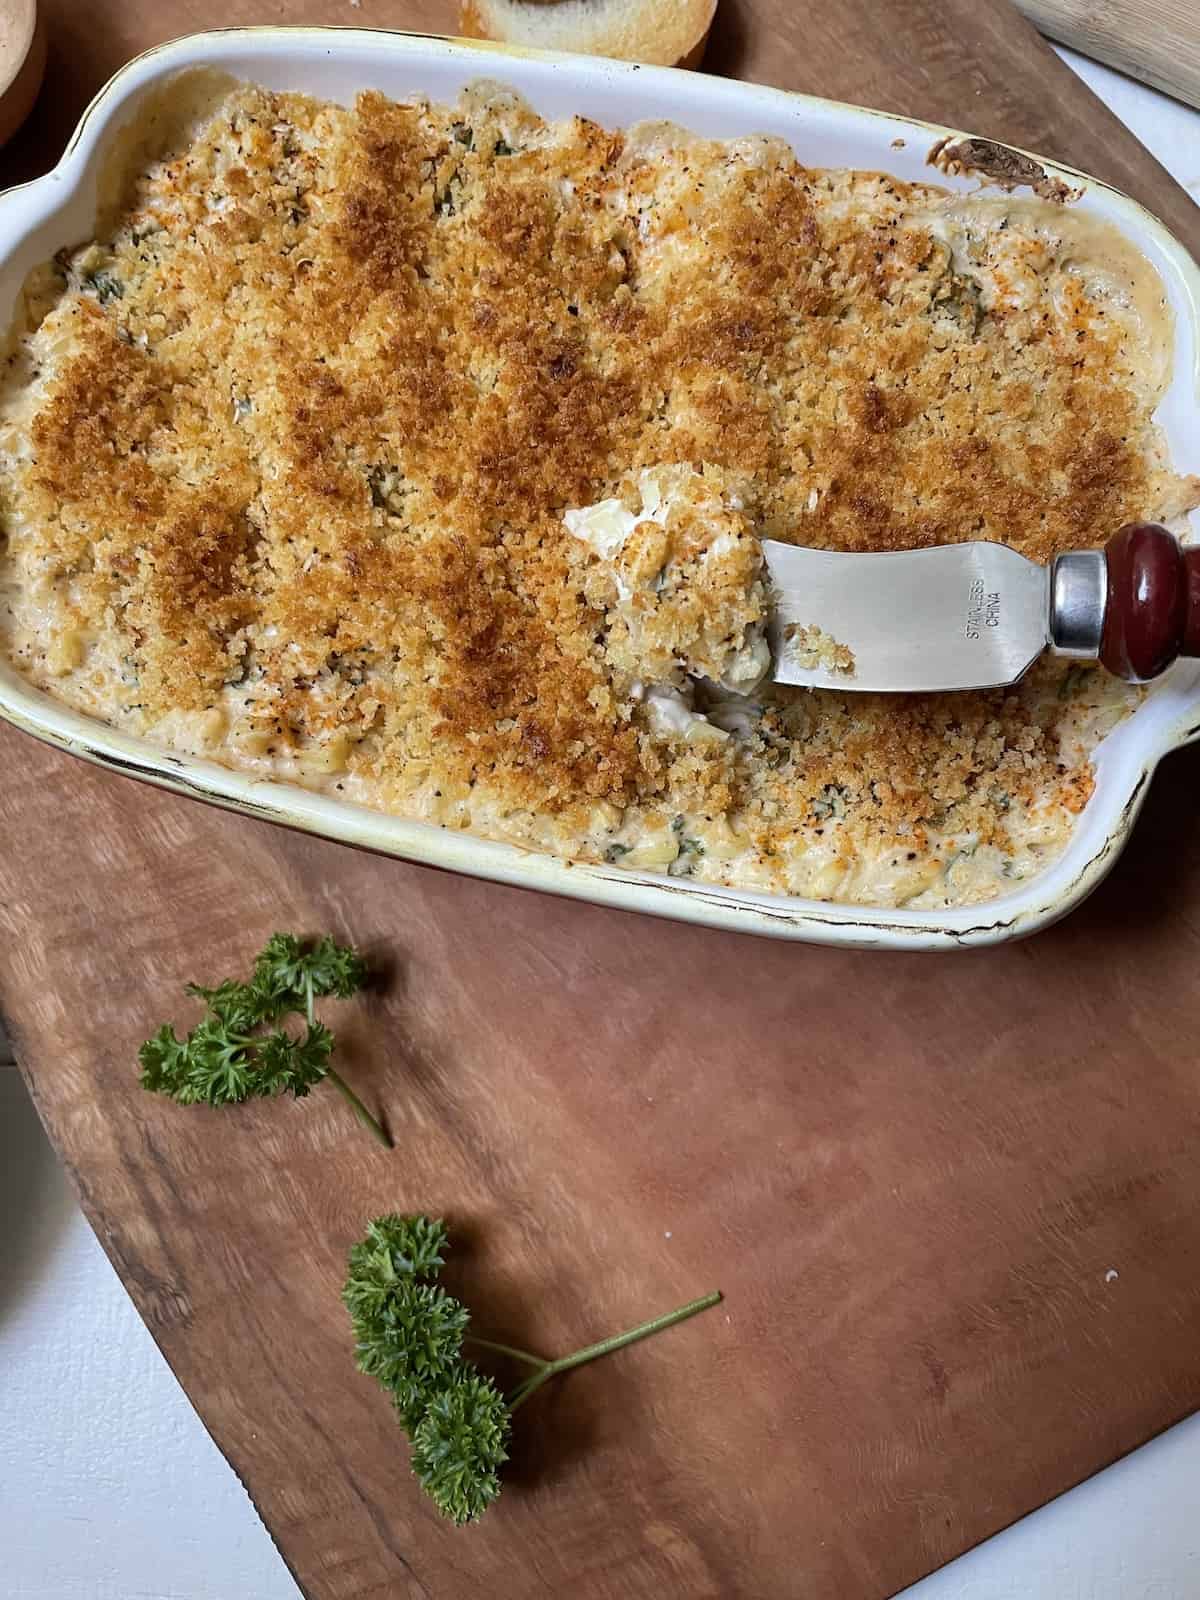 Shrimp dip in a casserole dish on a wood board with sliced bread, a spreader, parsley, and seasoning.